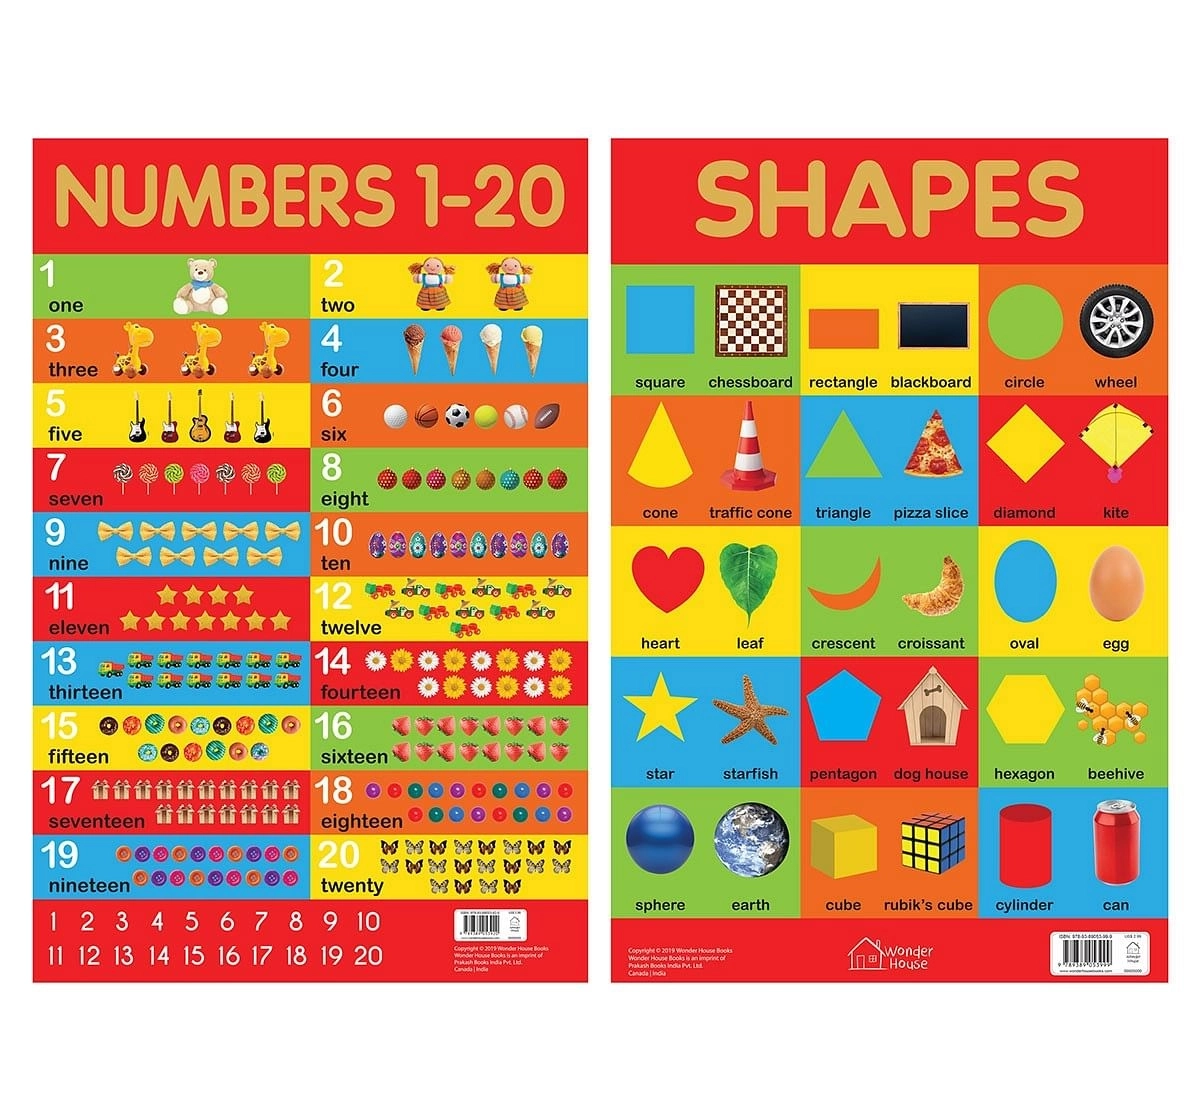 Early Learning Educational Charts For Kids - Pack Of Ten Charts Book, 10 Pages Book By Wonder House Books, Box Set